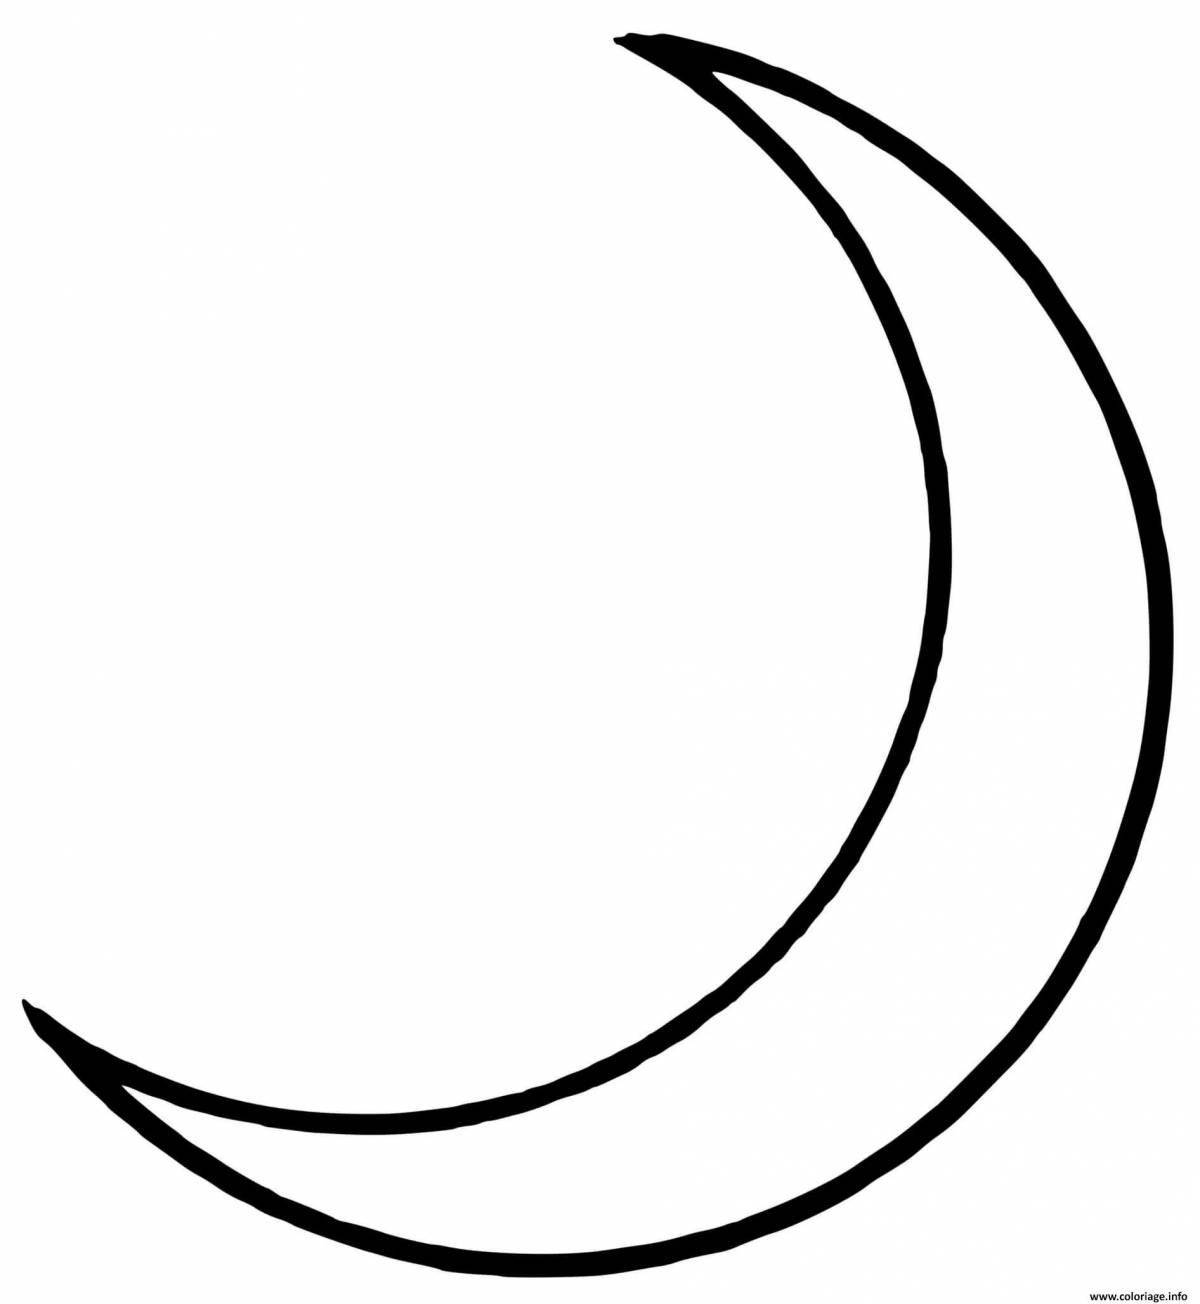 Intriguing crescent coloring book